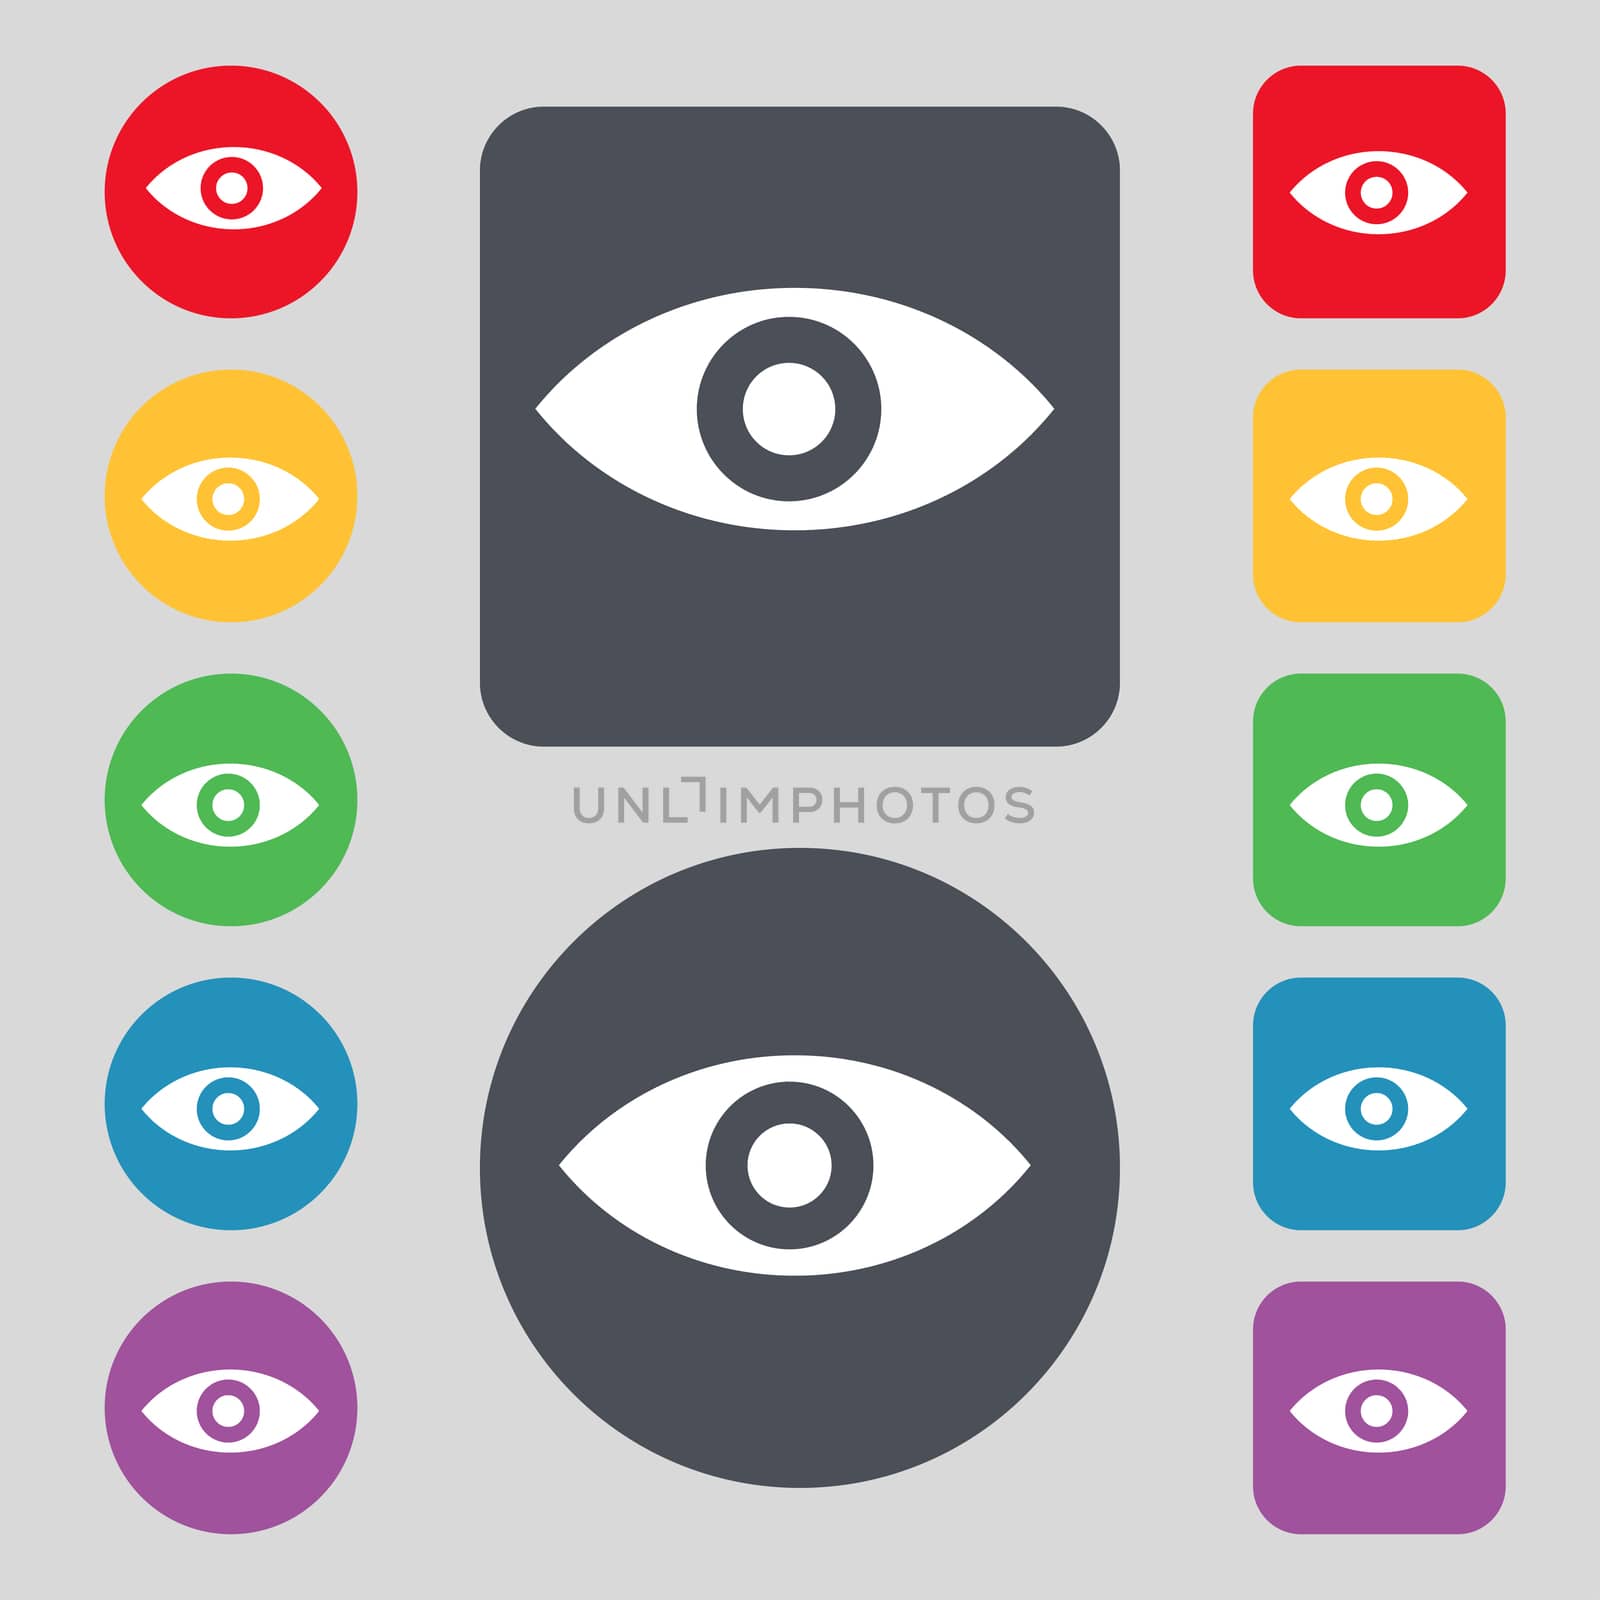 Eye, Publish content, sixth sense, intuition icon sign. A set of 12 colored buttons. Flat design. illustration